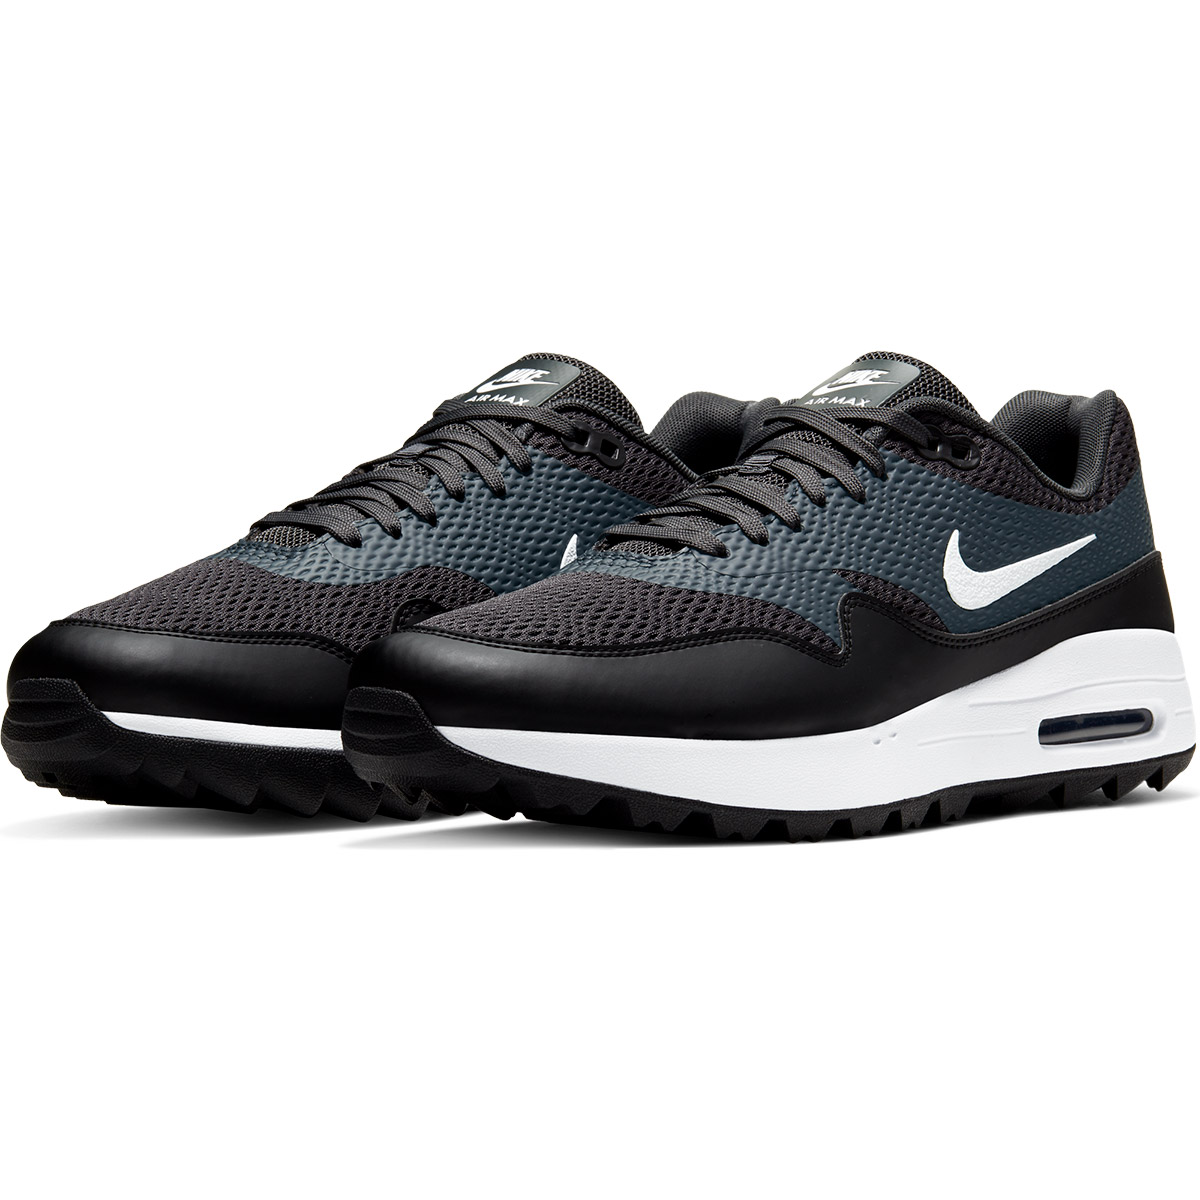 Nike Golf Air Max 1g Shoes 2020 From American Golf